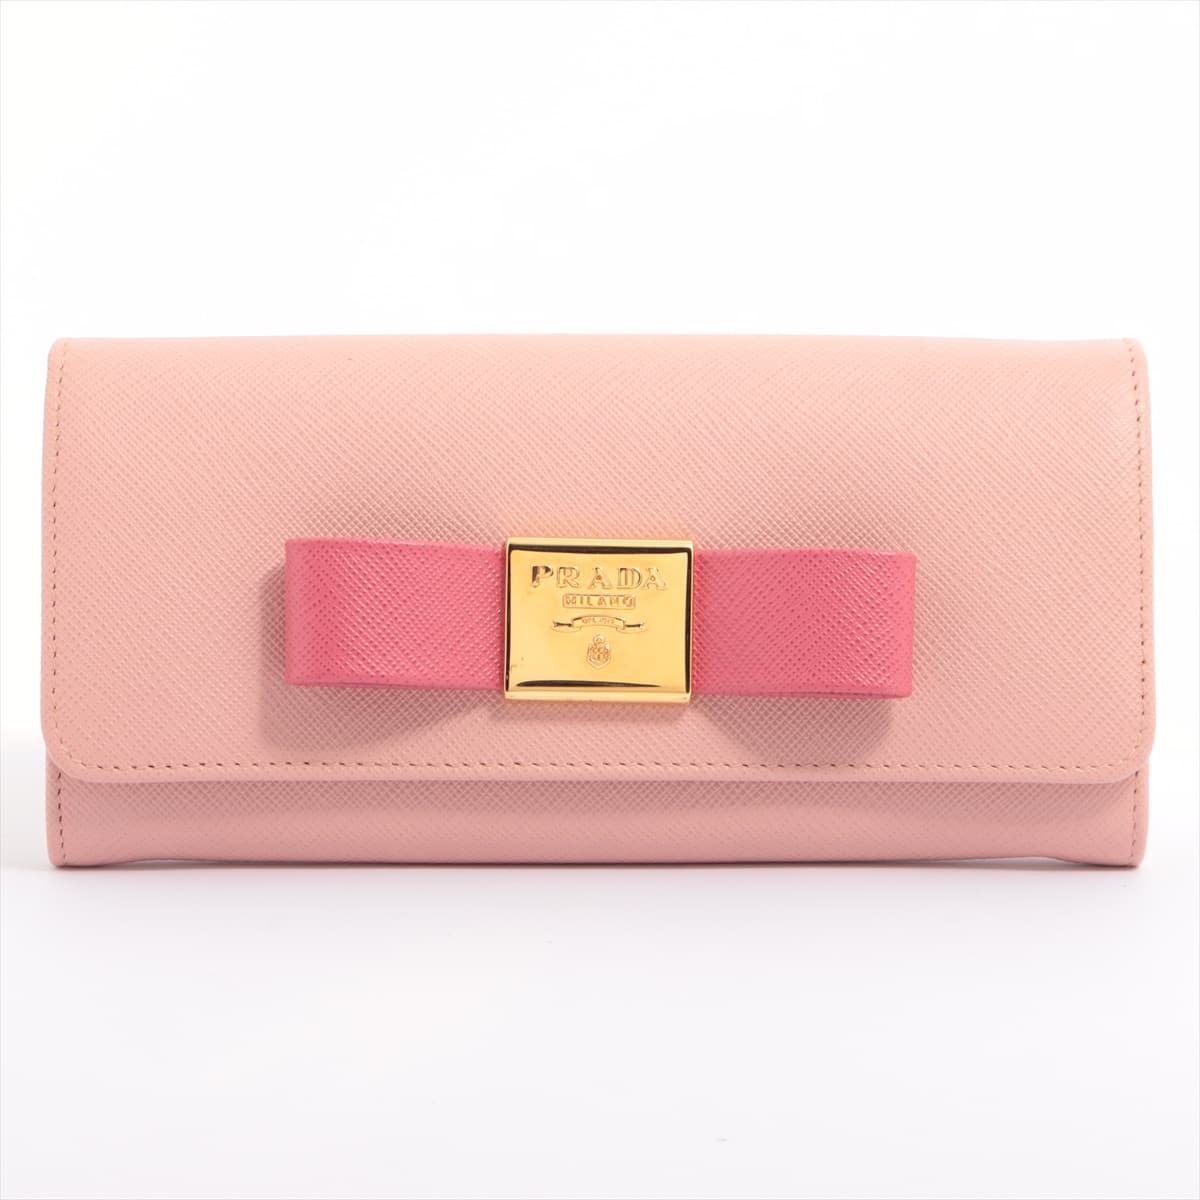 Prada Saffiano Fiocco 1MH132 Leather Wallet Pink